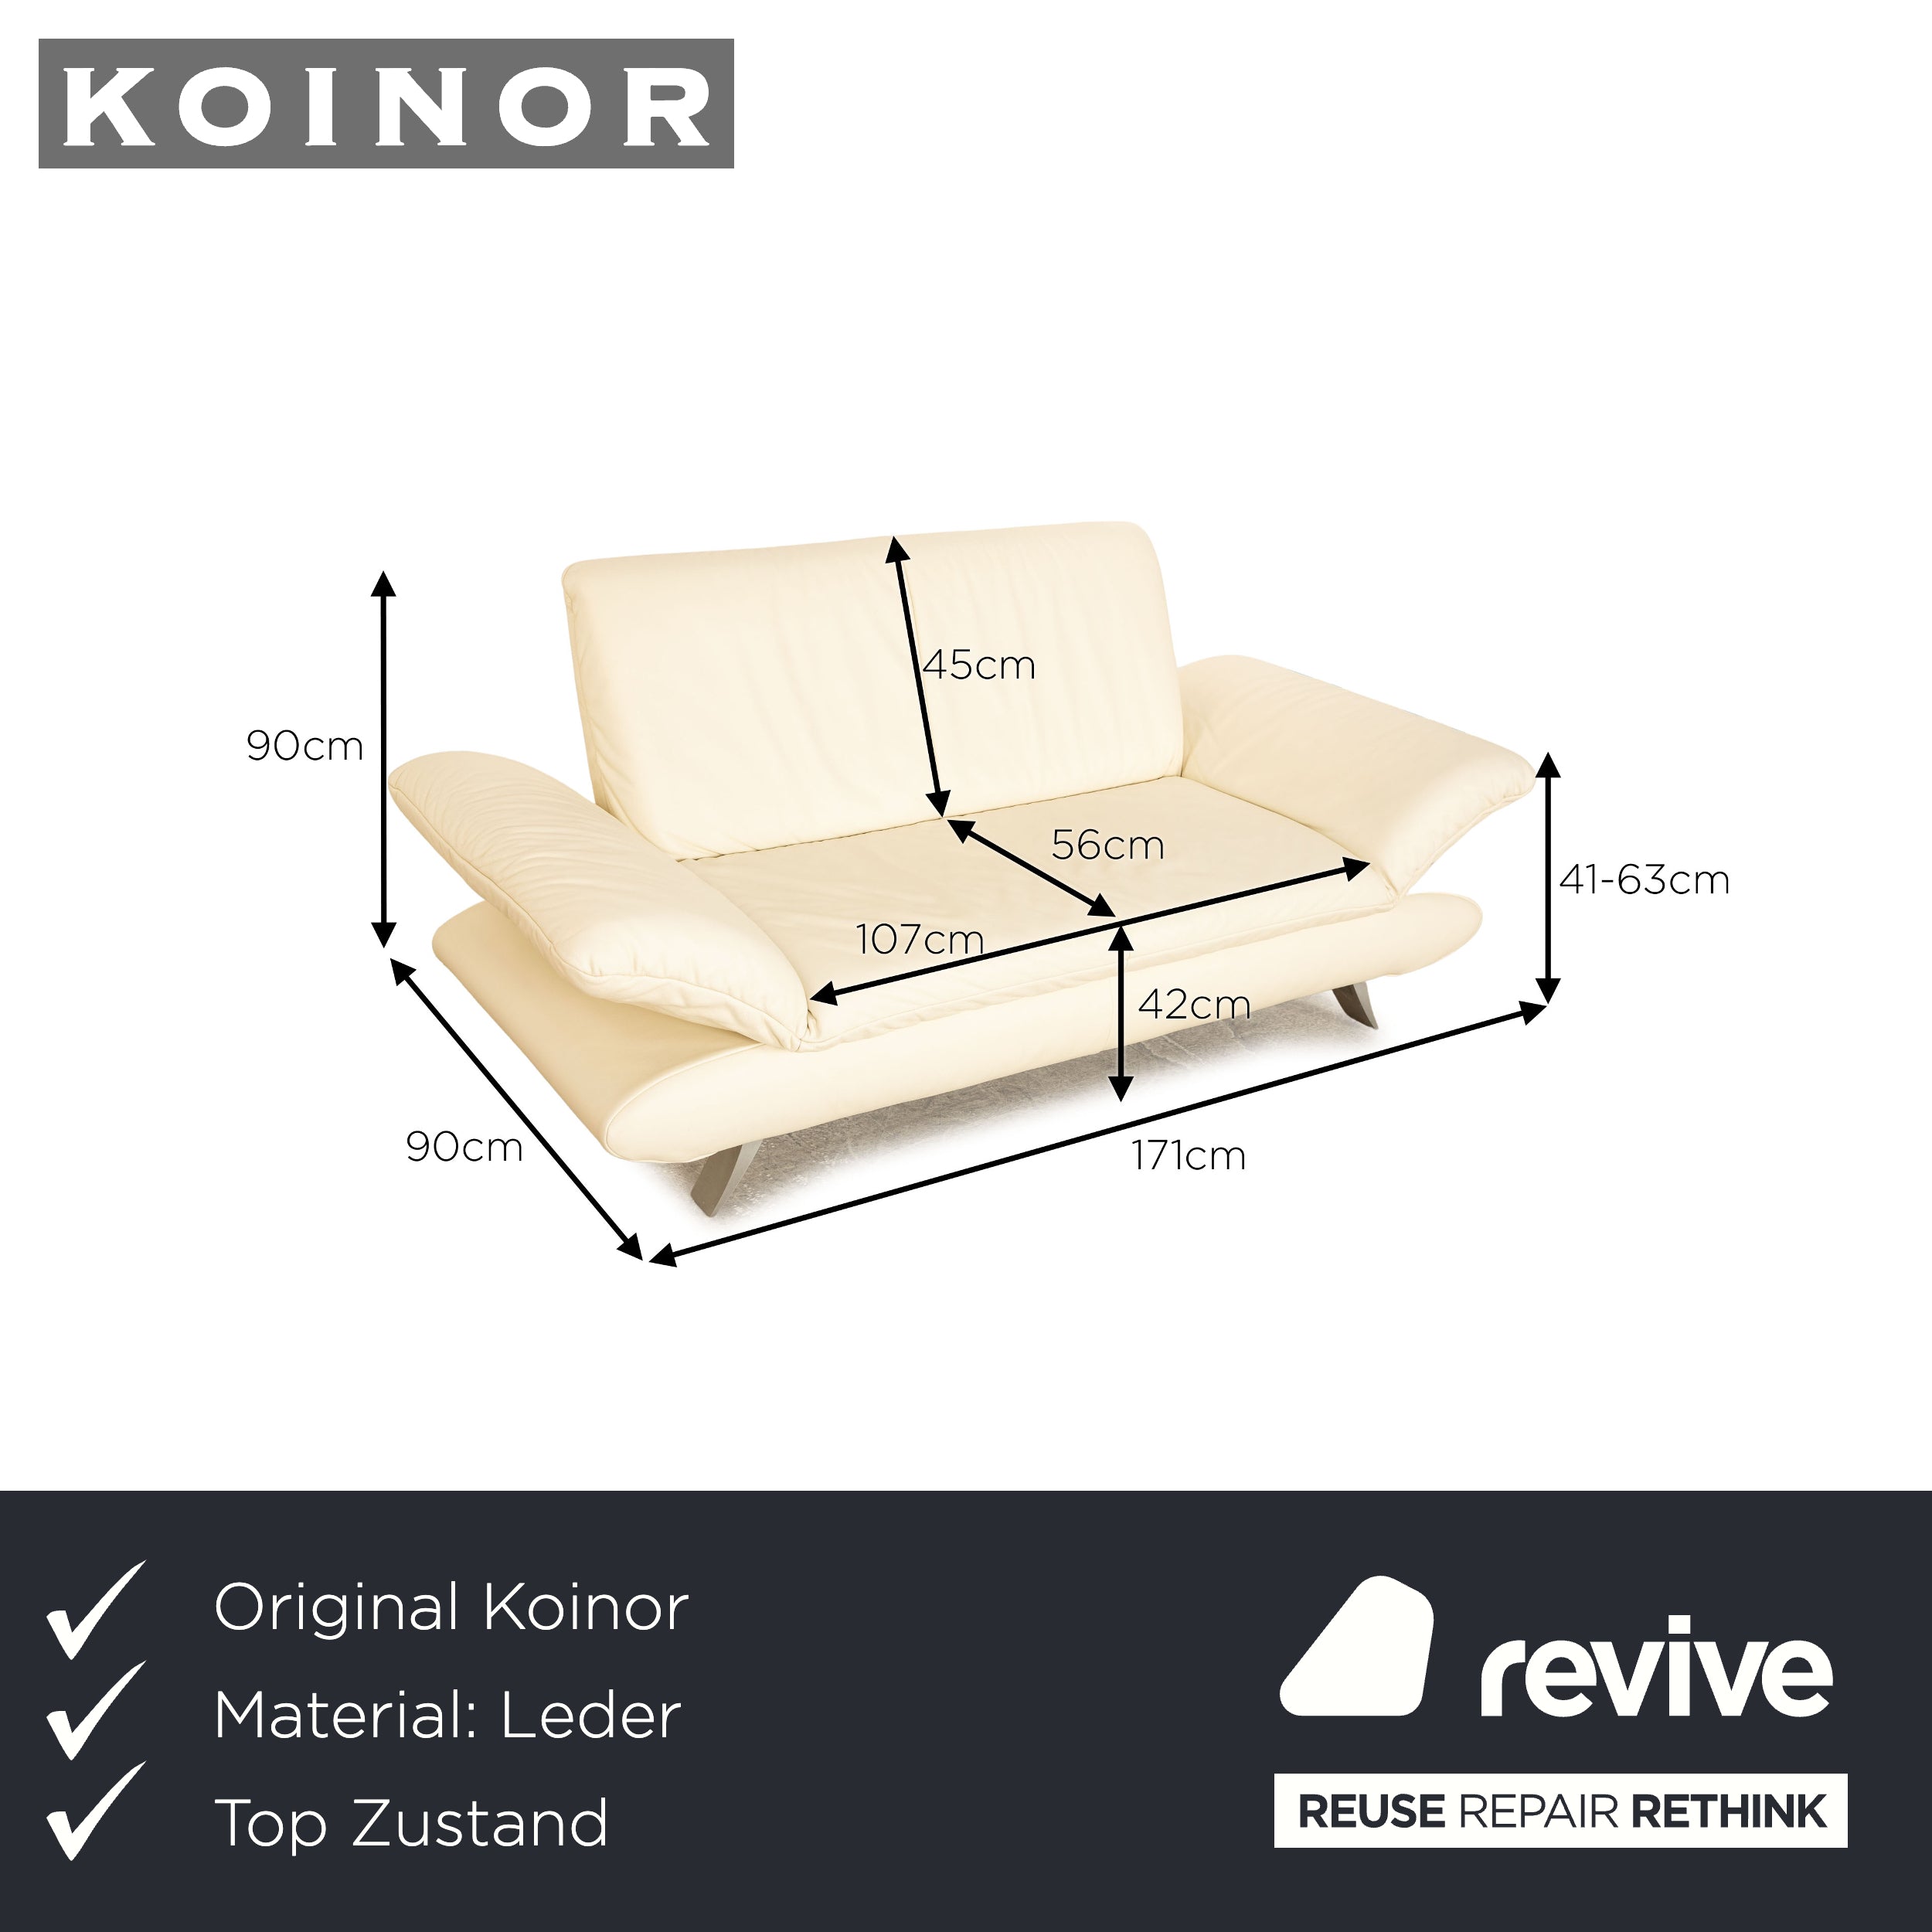 Koinor Rossini leather loveseat cream manual function sofa couch